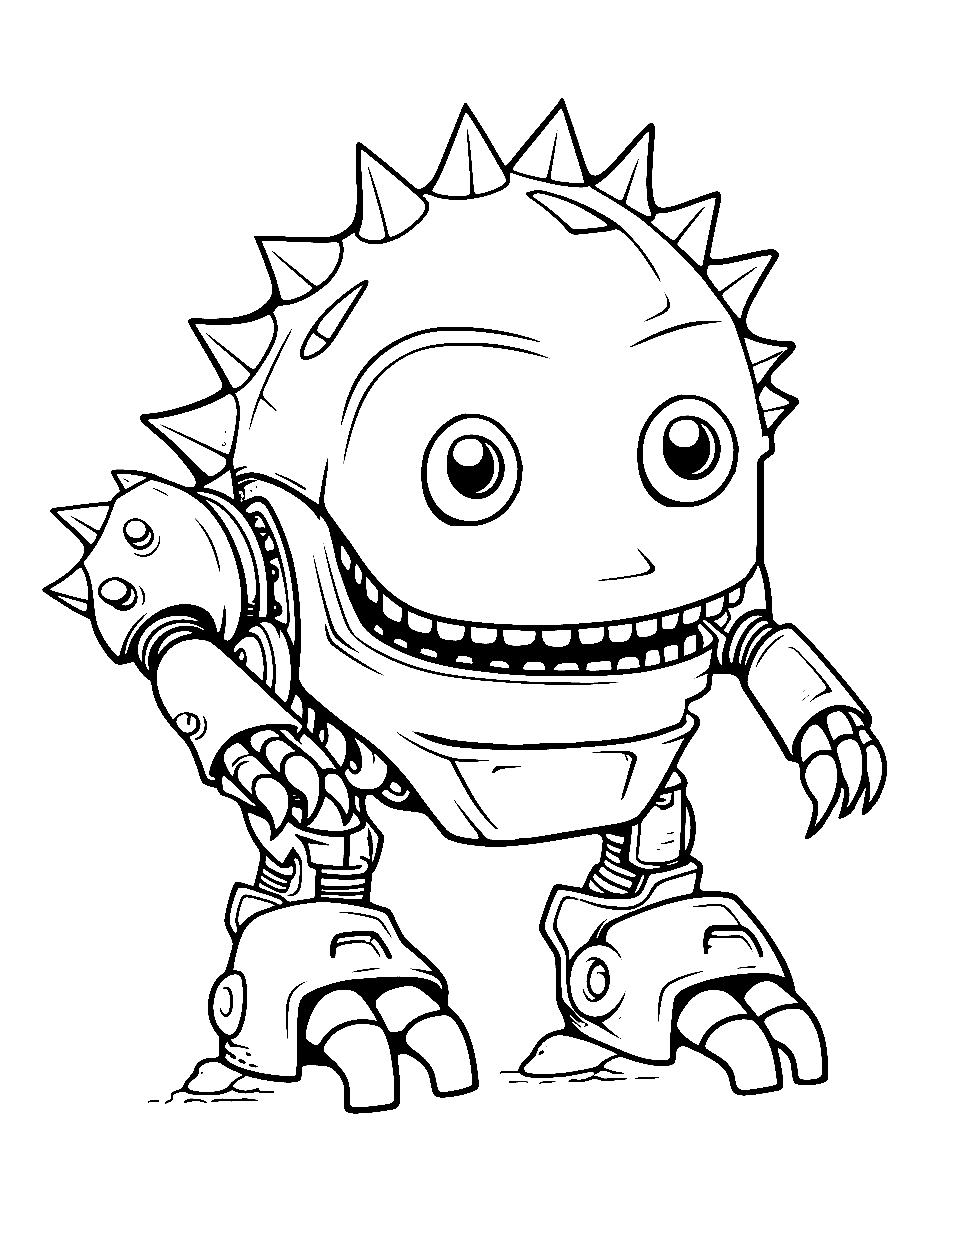 Robot Kaiju Coloring Page - A robot-inspired kaiju design, with gears and metal plates.